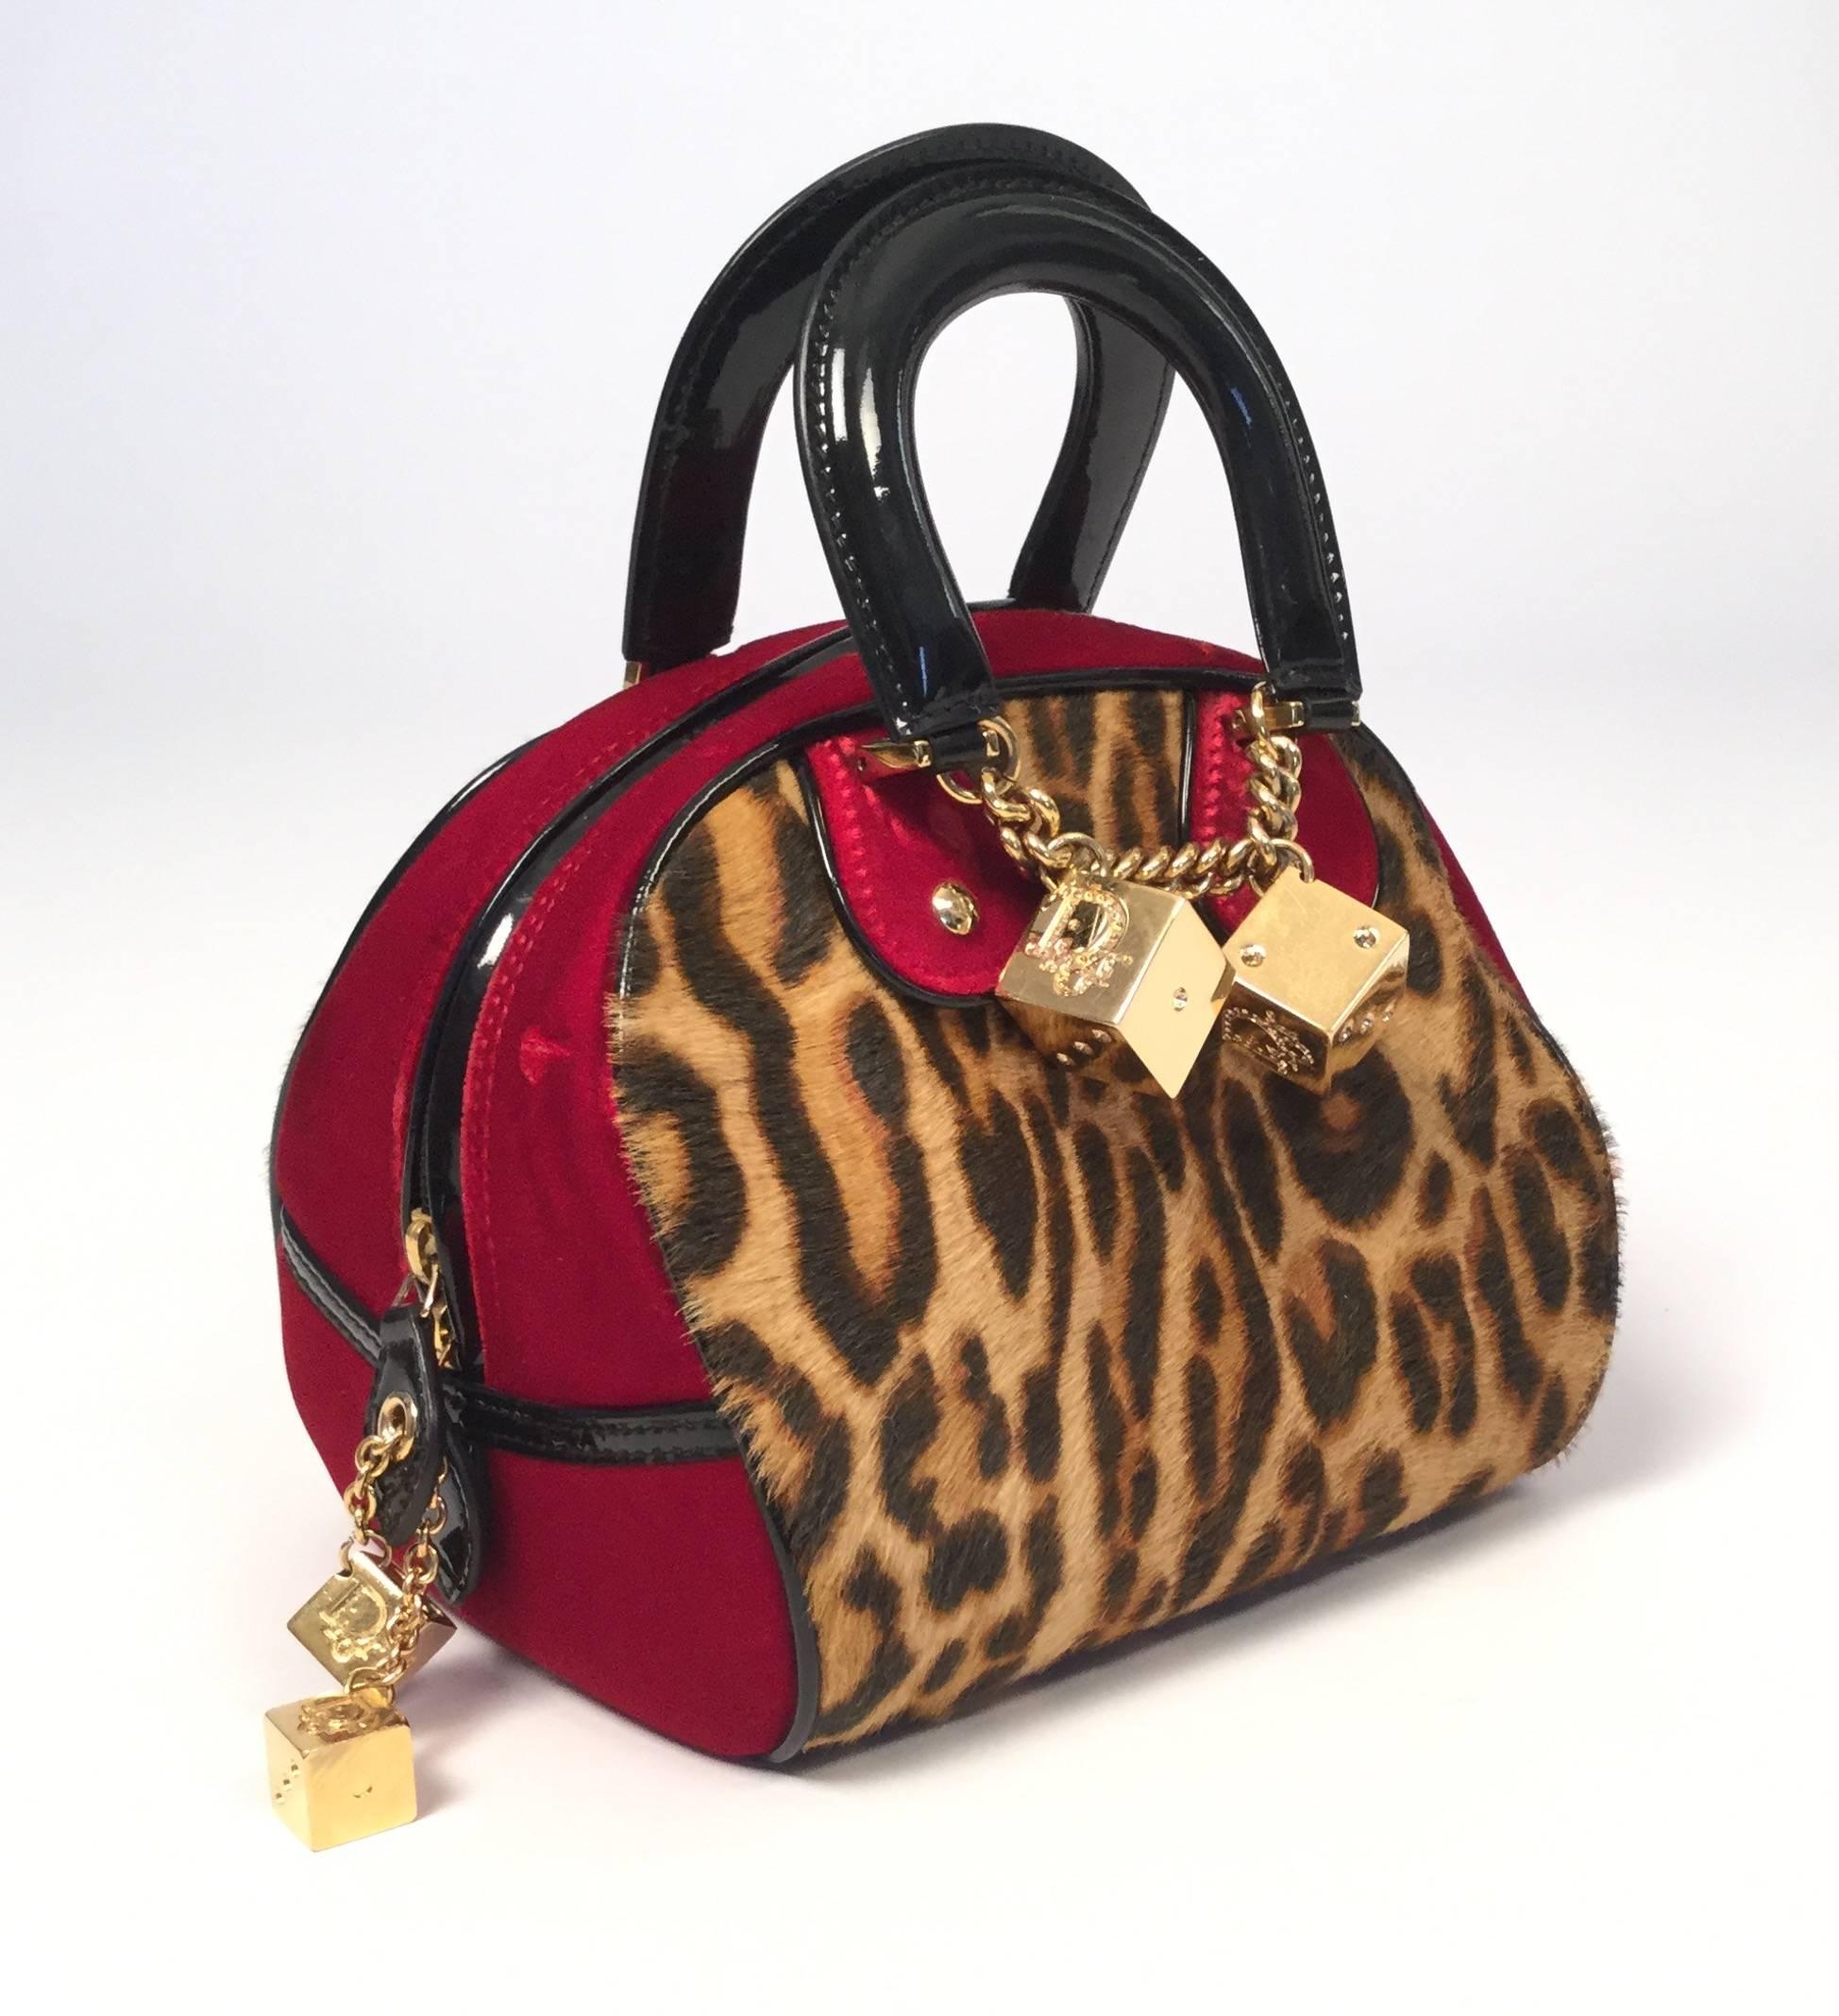 Perfect for fall comes this extremely rare 2004 Christian Dior Fall runway handbag.

This "Gambler" handbag is made of leopard print pony and luxe ruby red velvet with black patent leater trim on the handles and surrounding the body of